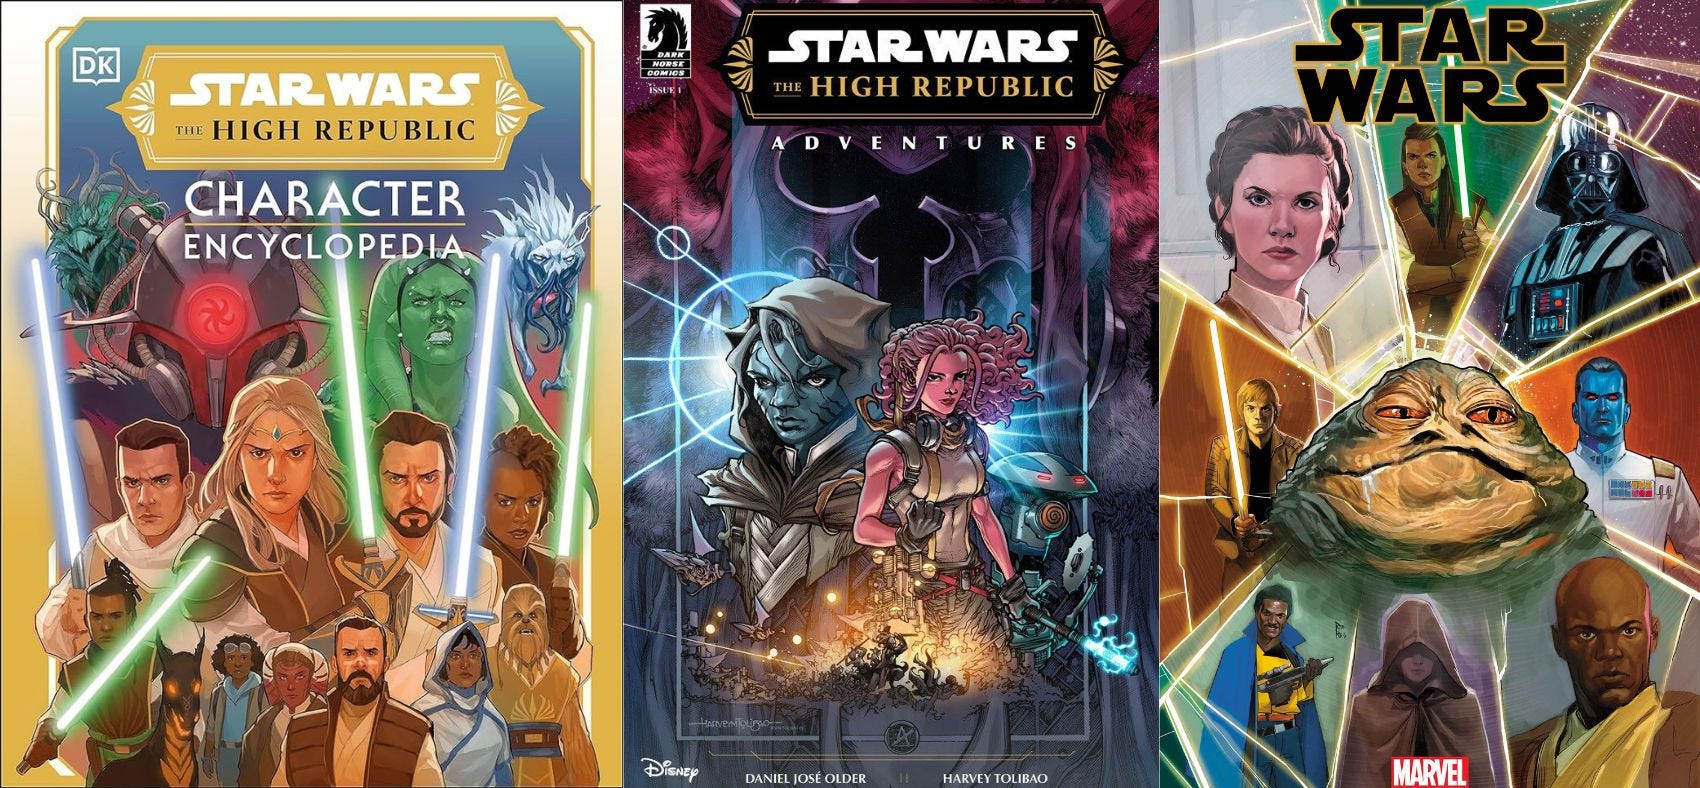 SWBC: Star Wars books of December, and a look ahead to 2024 releases